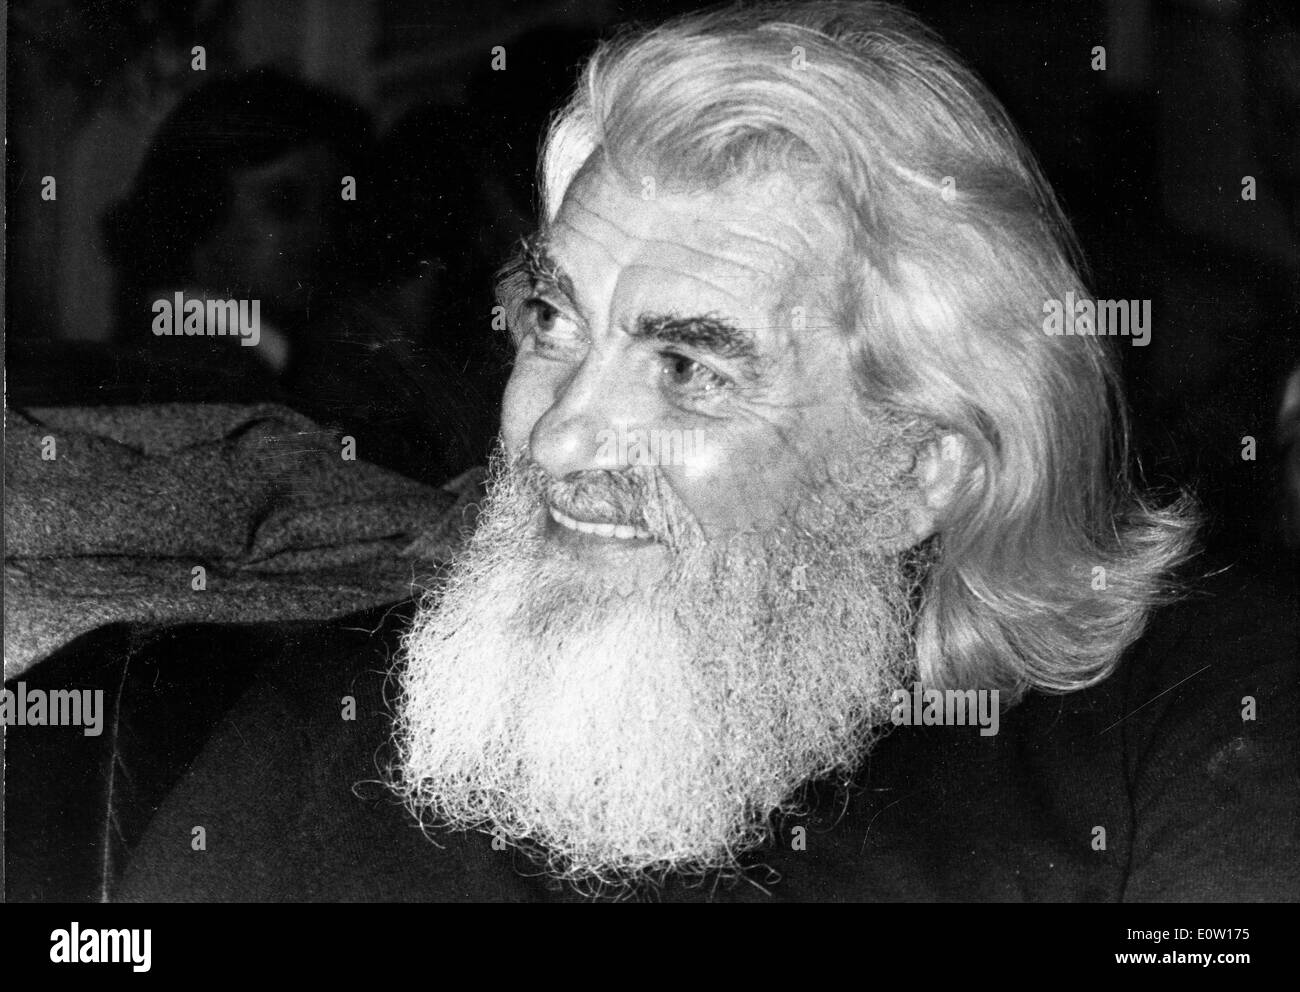 Actor Jean Marais in costume as an old man Stock Photo